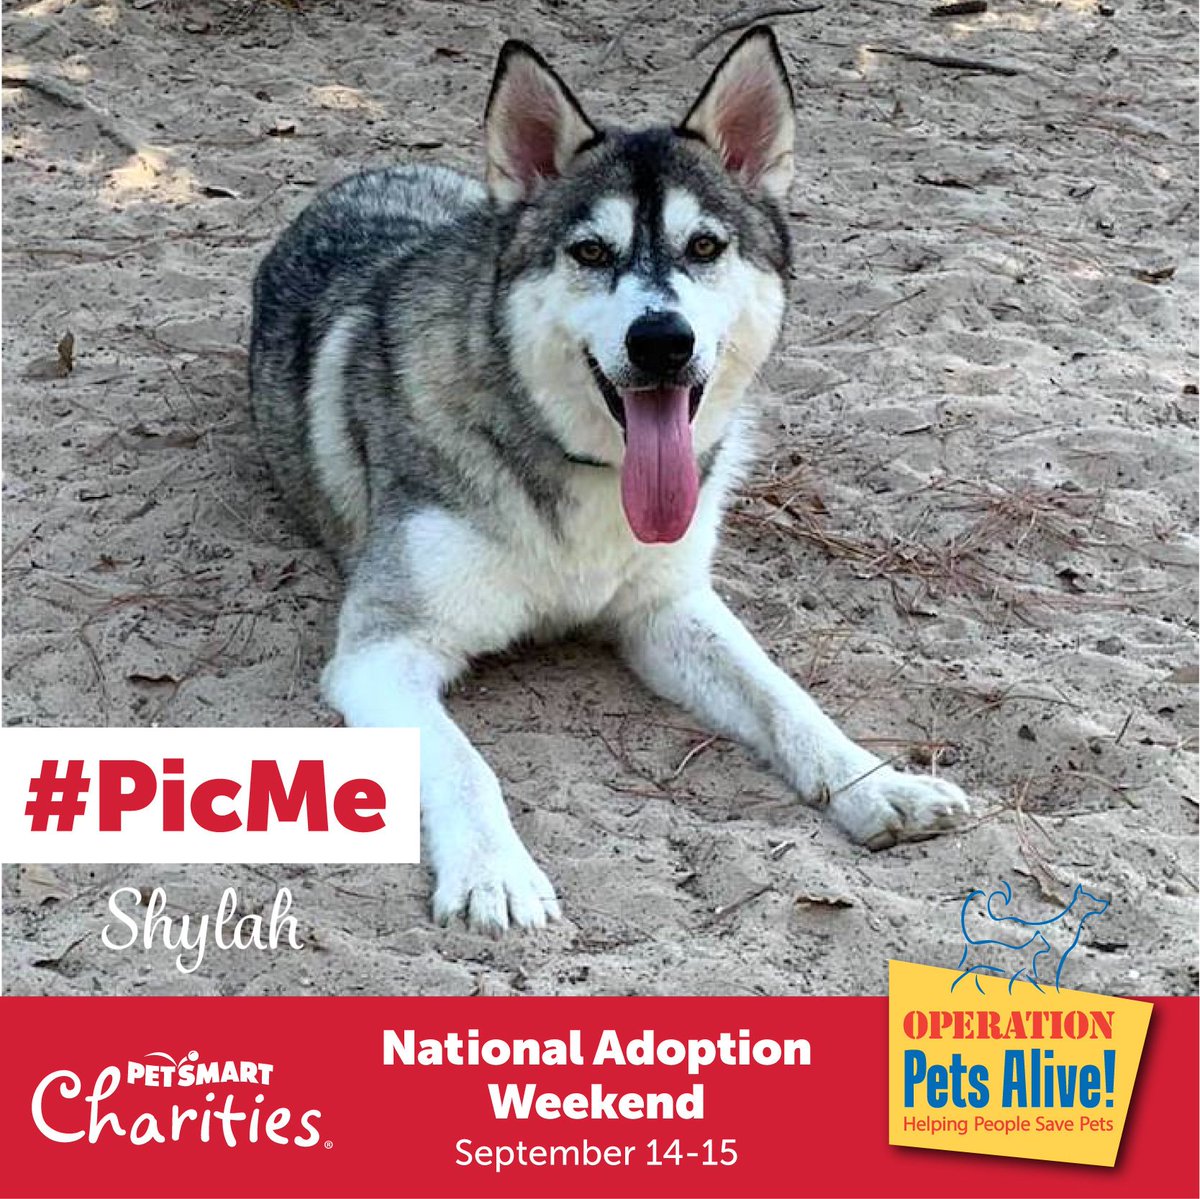 🎶 Sha-La-La, Sha-La-Laaaaaaaaaaaaaaa ...🎶 #OPAadoptable Shylah is howlin’ up a storm, to let YOU know it's a @PetSmartChariTs #PicMe National Adoption Weekend! Come meet Shylah at @PetSmart Riley Fuzzel, Sat. 12-4 pm, & other adoptable pups & kitties! fb.com/OPATexas/events